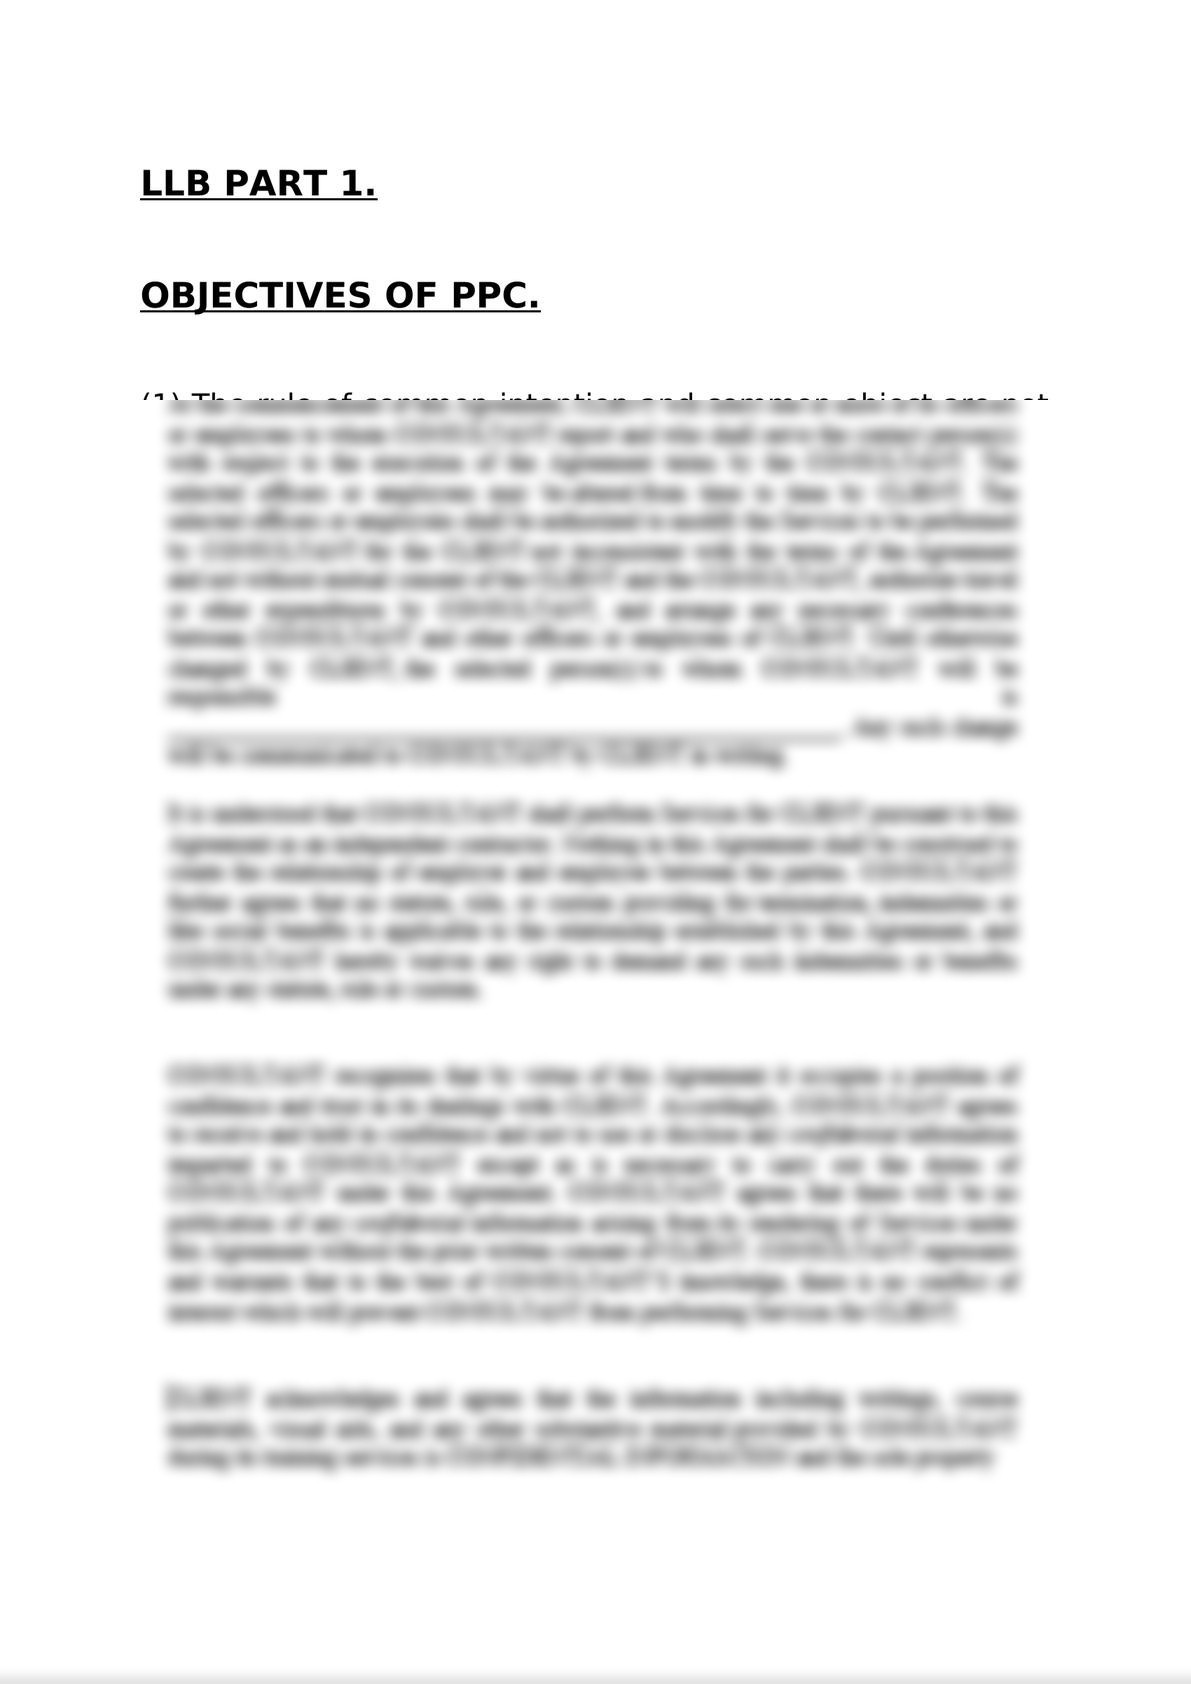 objectives of ppc-0